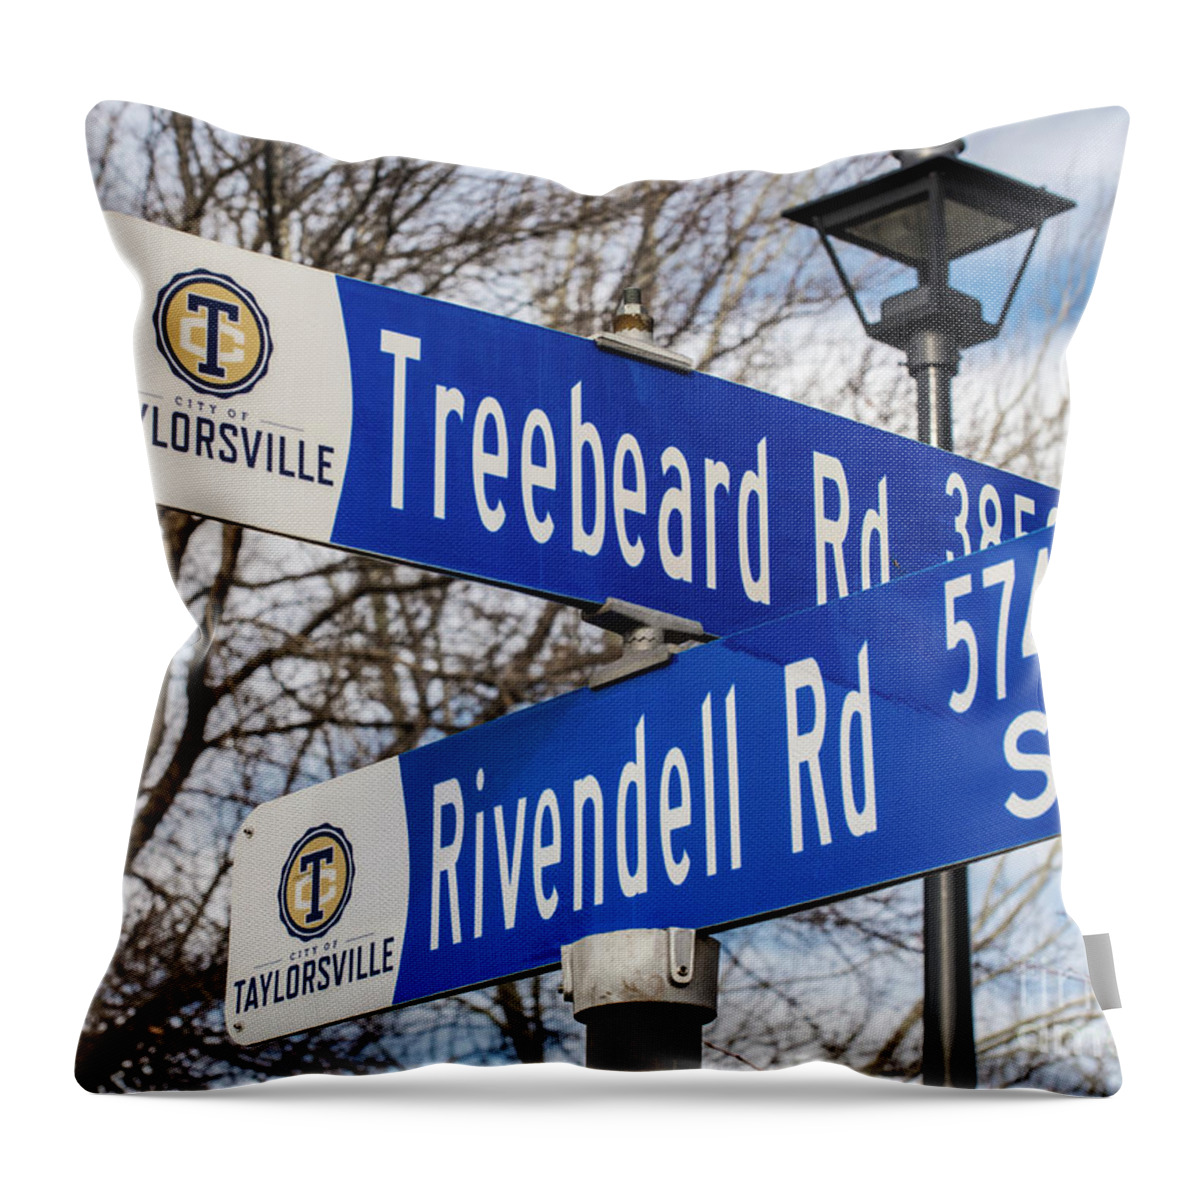 Treebeard Throw Pillow featuring the photograph Treebeard and Rivendell Street Signs by Gary Whitton